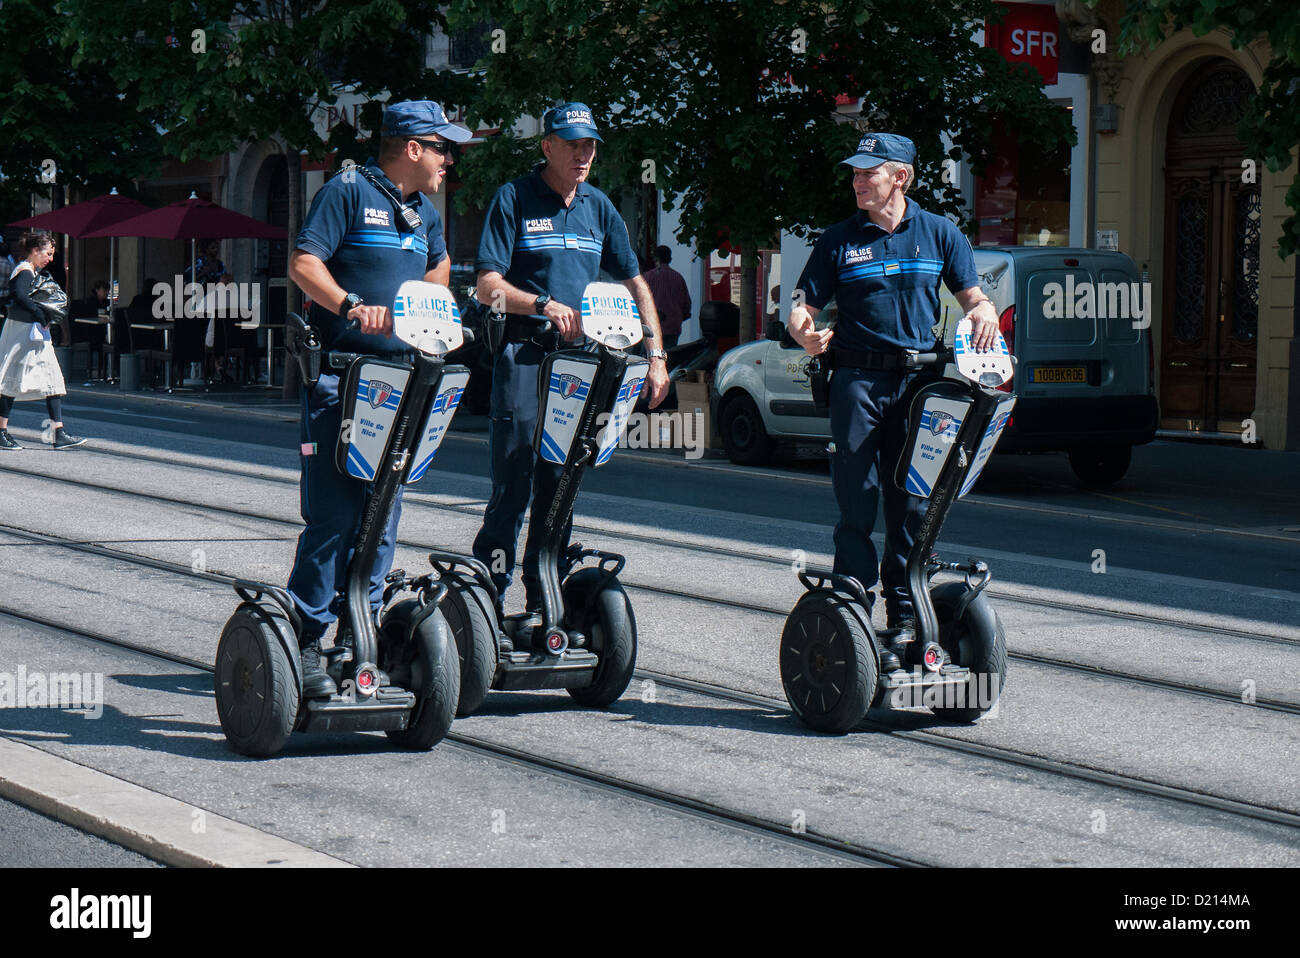 Three French police officers patrol on Segway personal transporters in Nice on the French Riviera Stock Photo